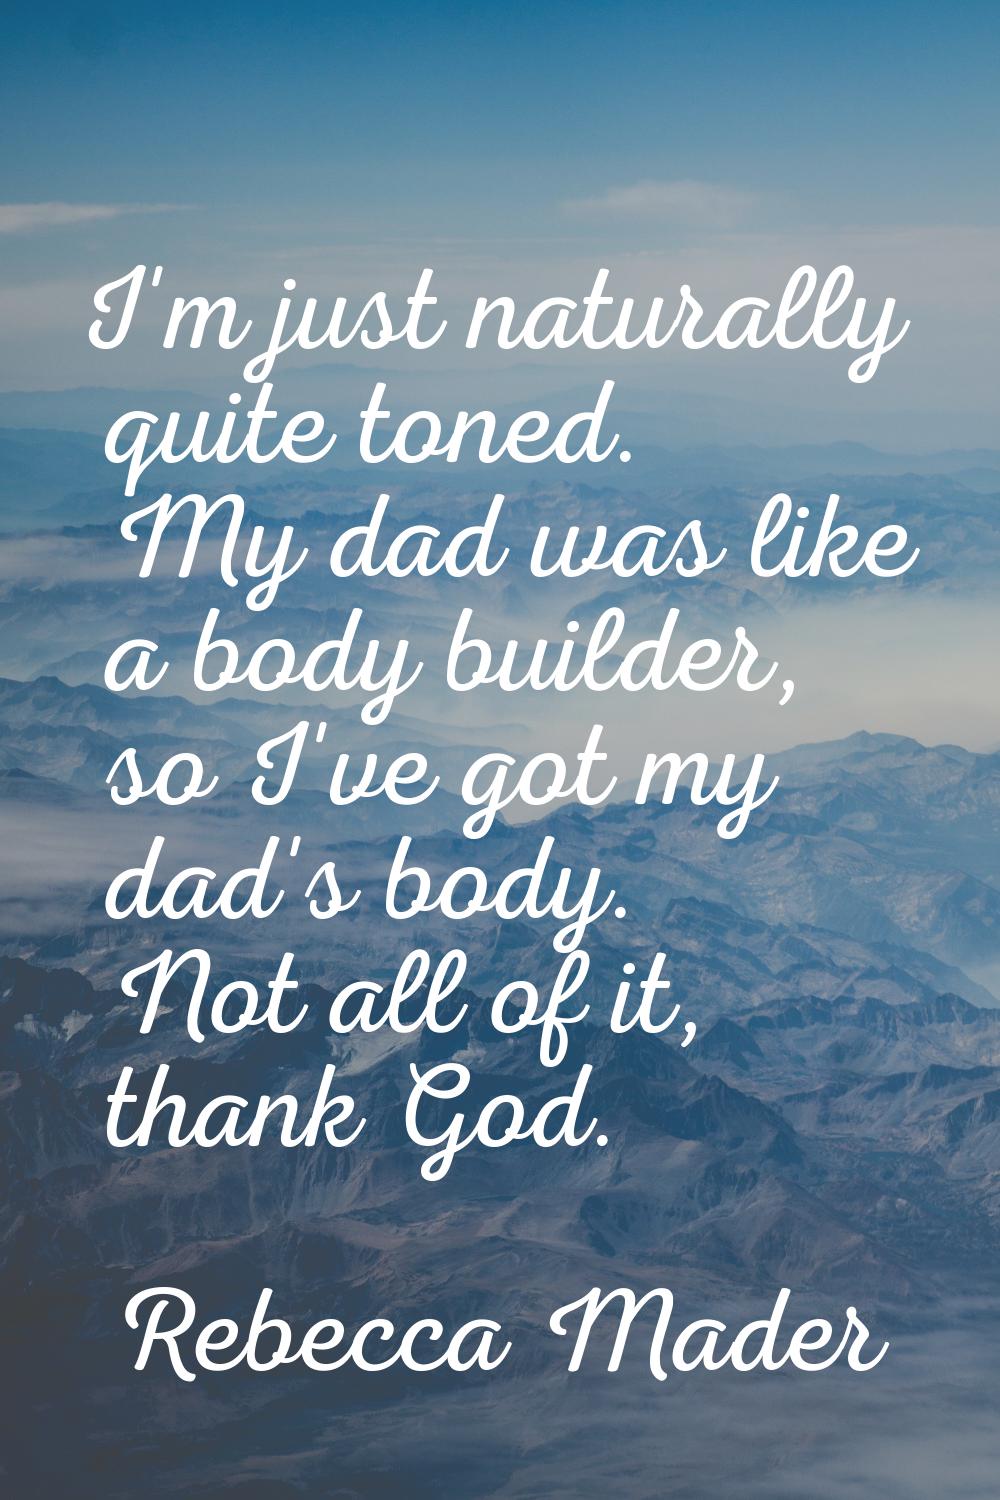 I'm just naturally quite toned. My dad was like a body builder, so I've got my dad's body. Not all 